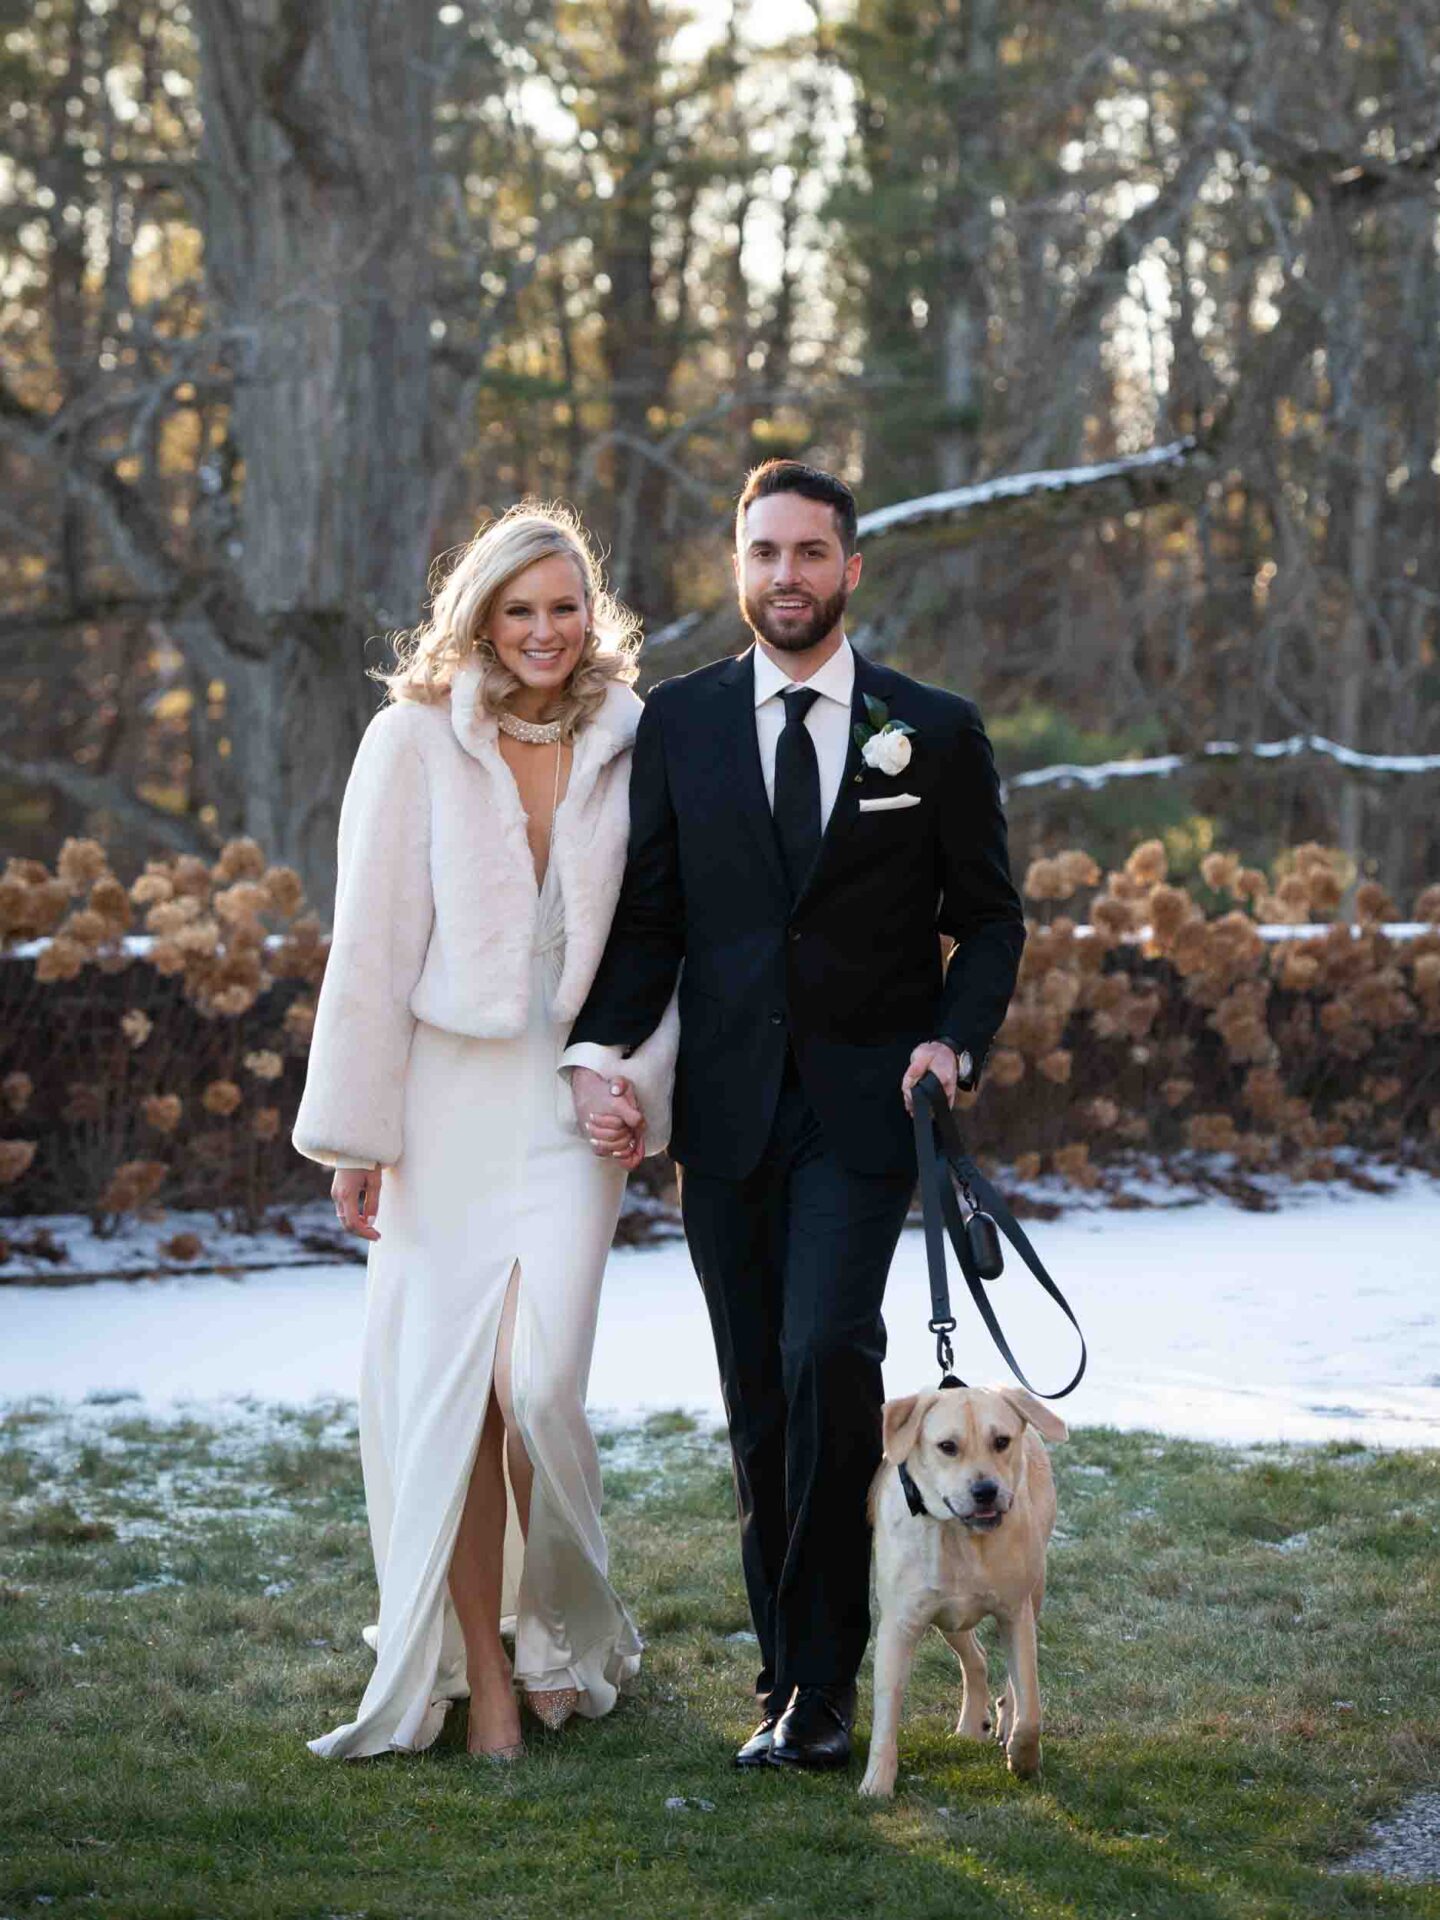 Bride and groom walking with puppy